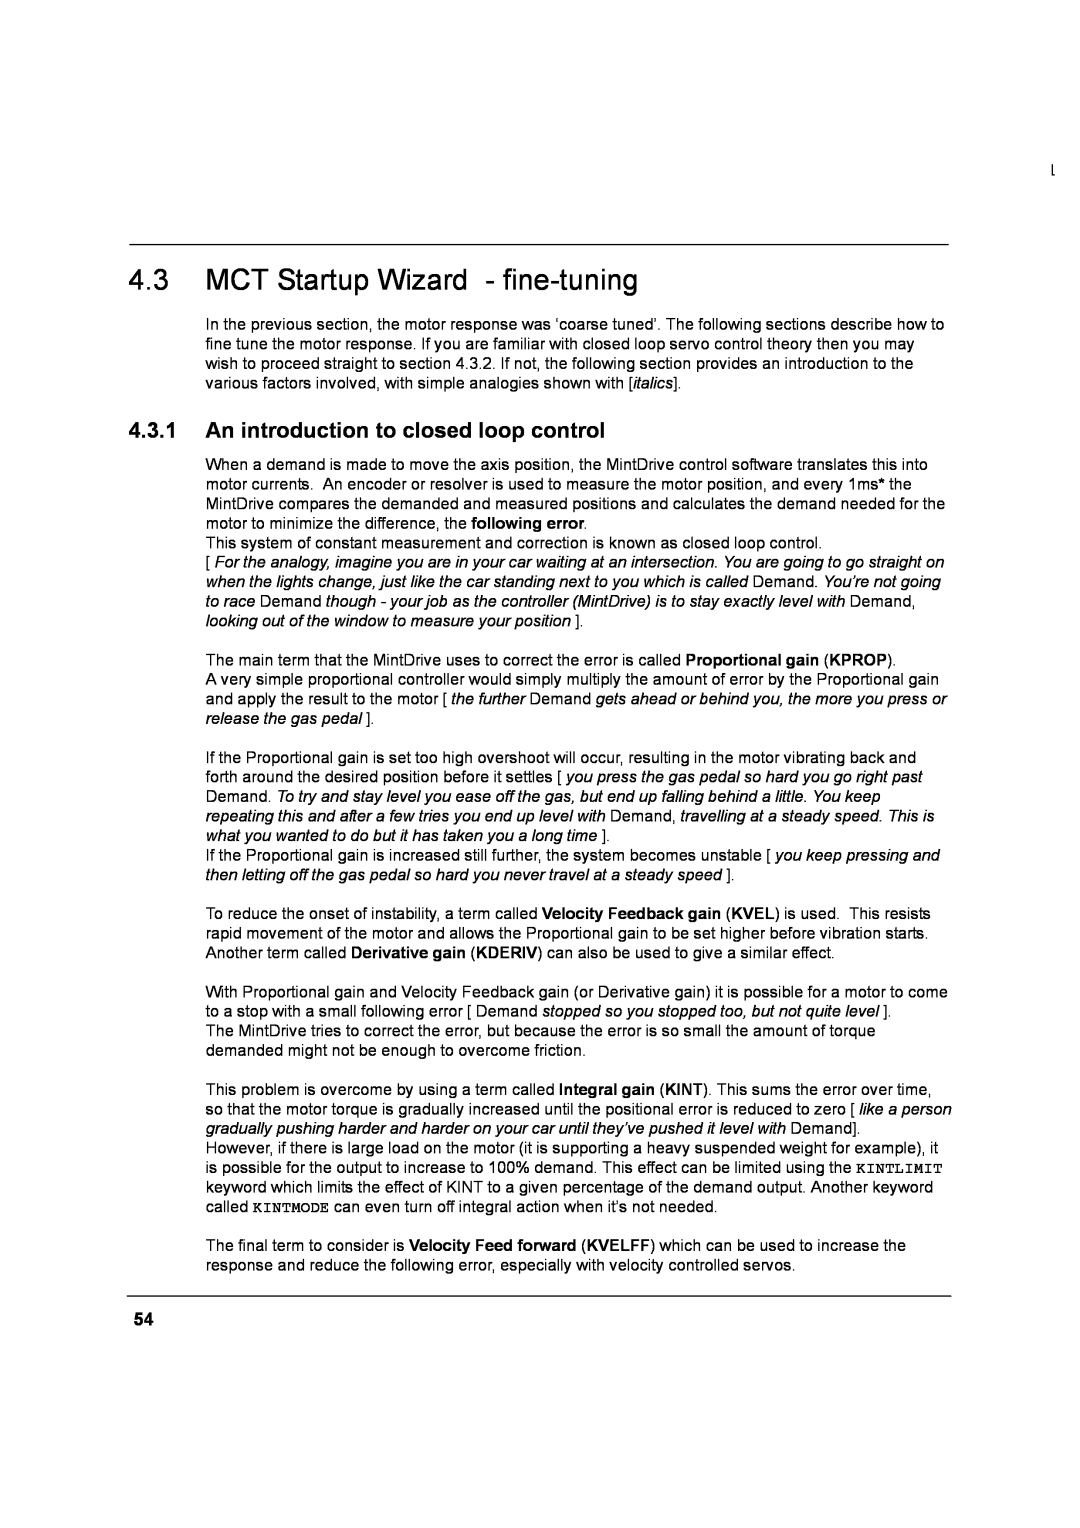 Baldor MN1274 06/2001 installation manual MCT Startup Wizard - fine-tuning, An introduction to closed loop control 